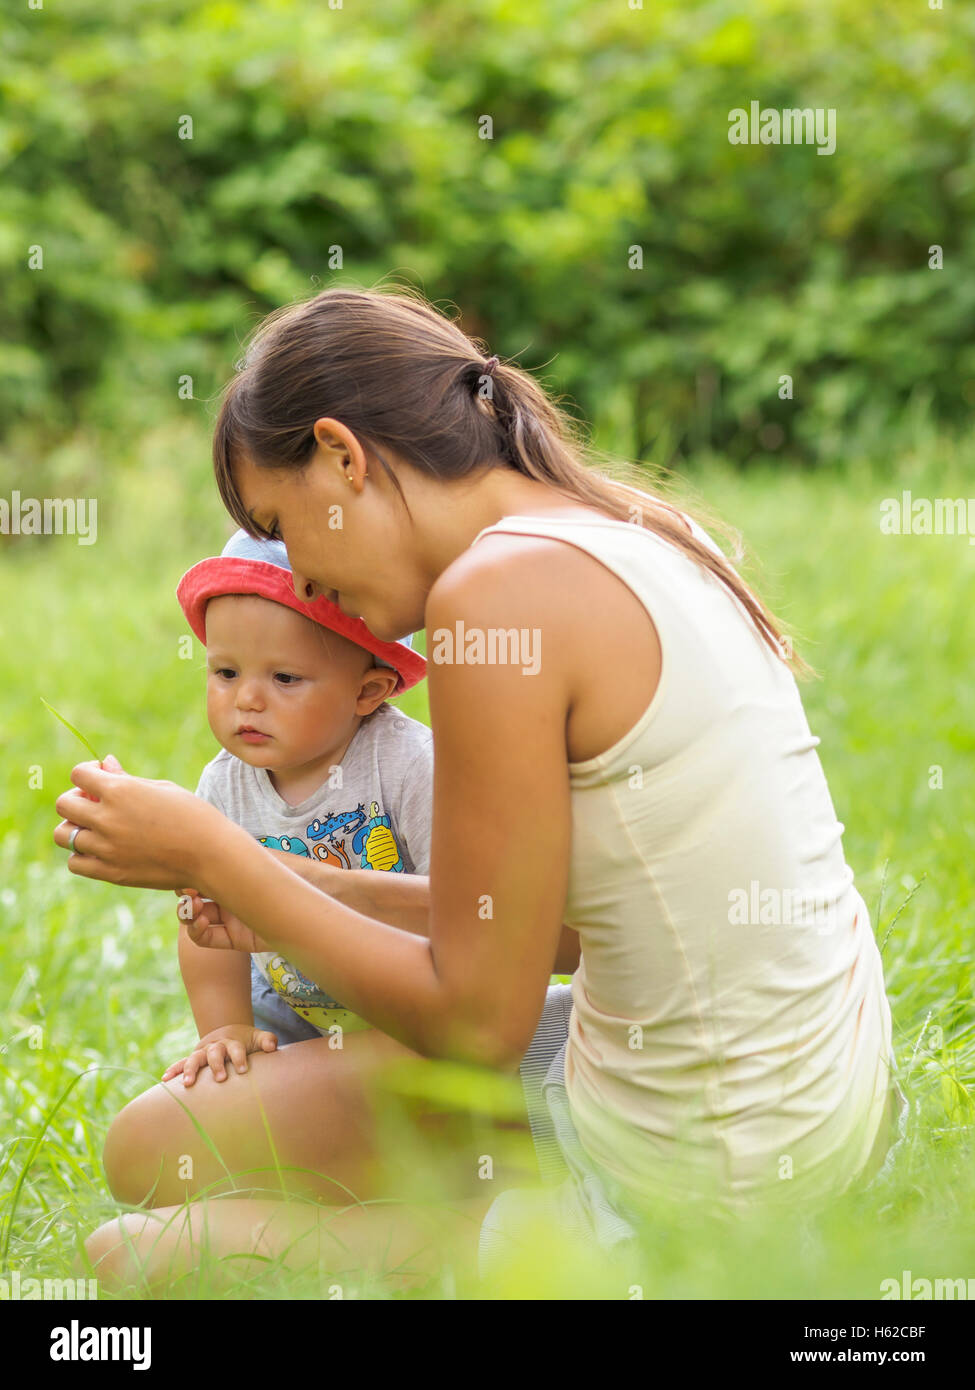 Mother and baby boy together on a meadow Stock Photo